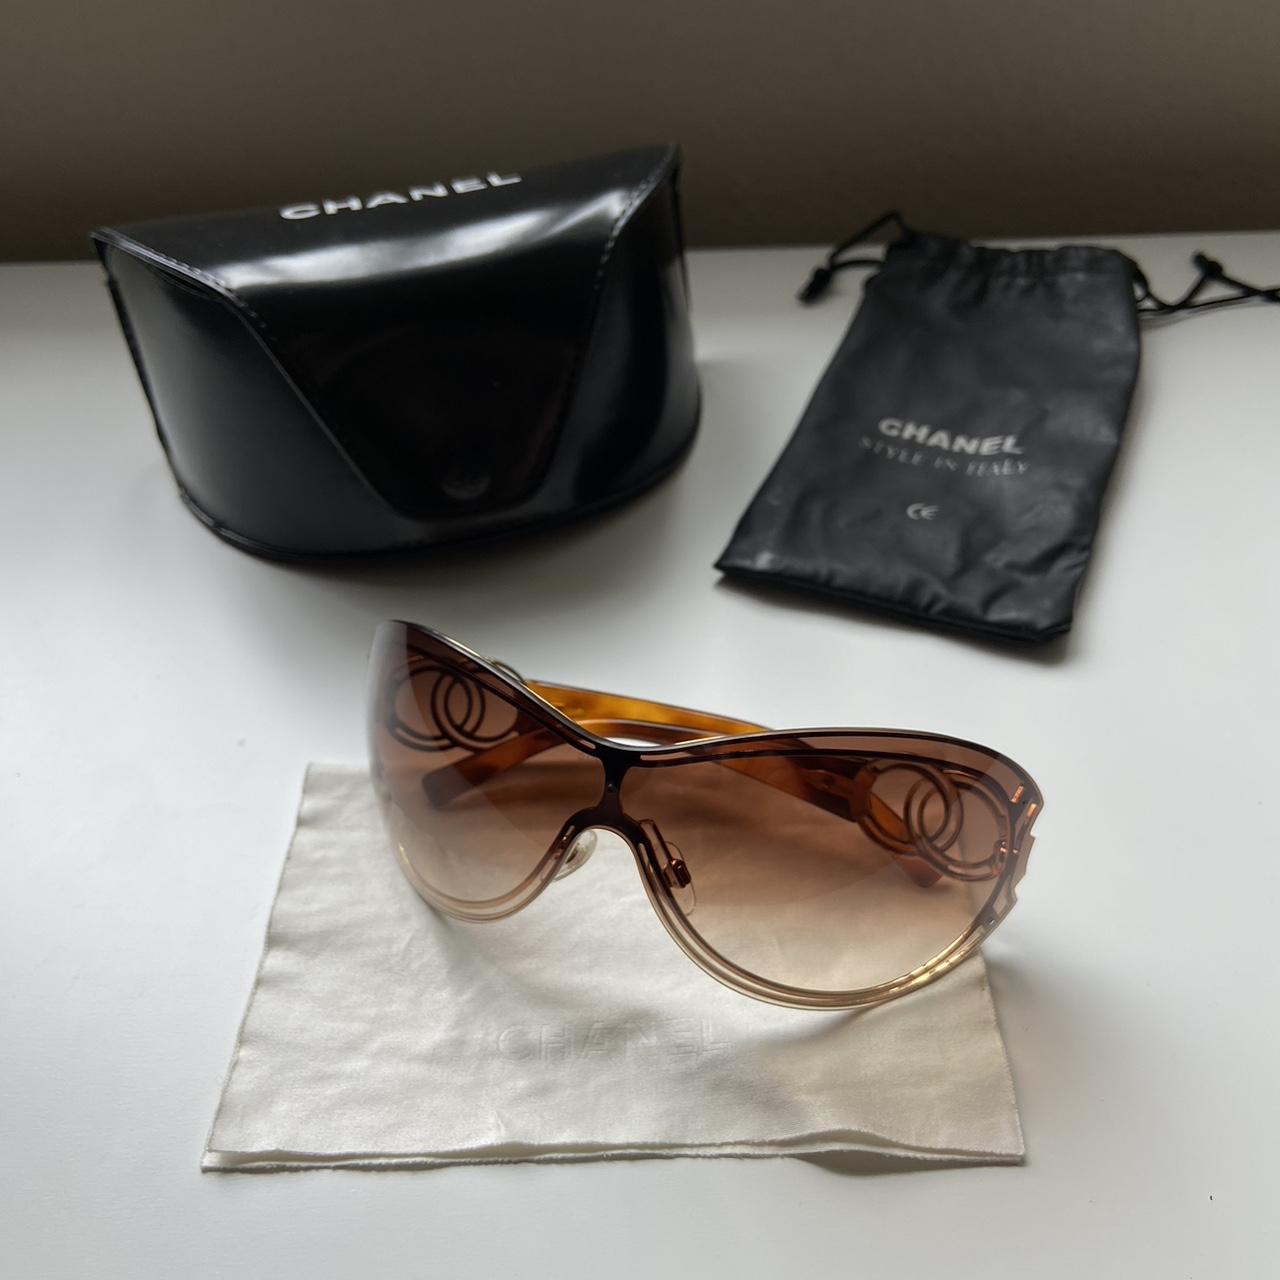 Authentic vintage Chanel sunglasses. Serial 4144.